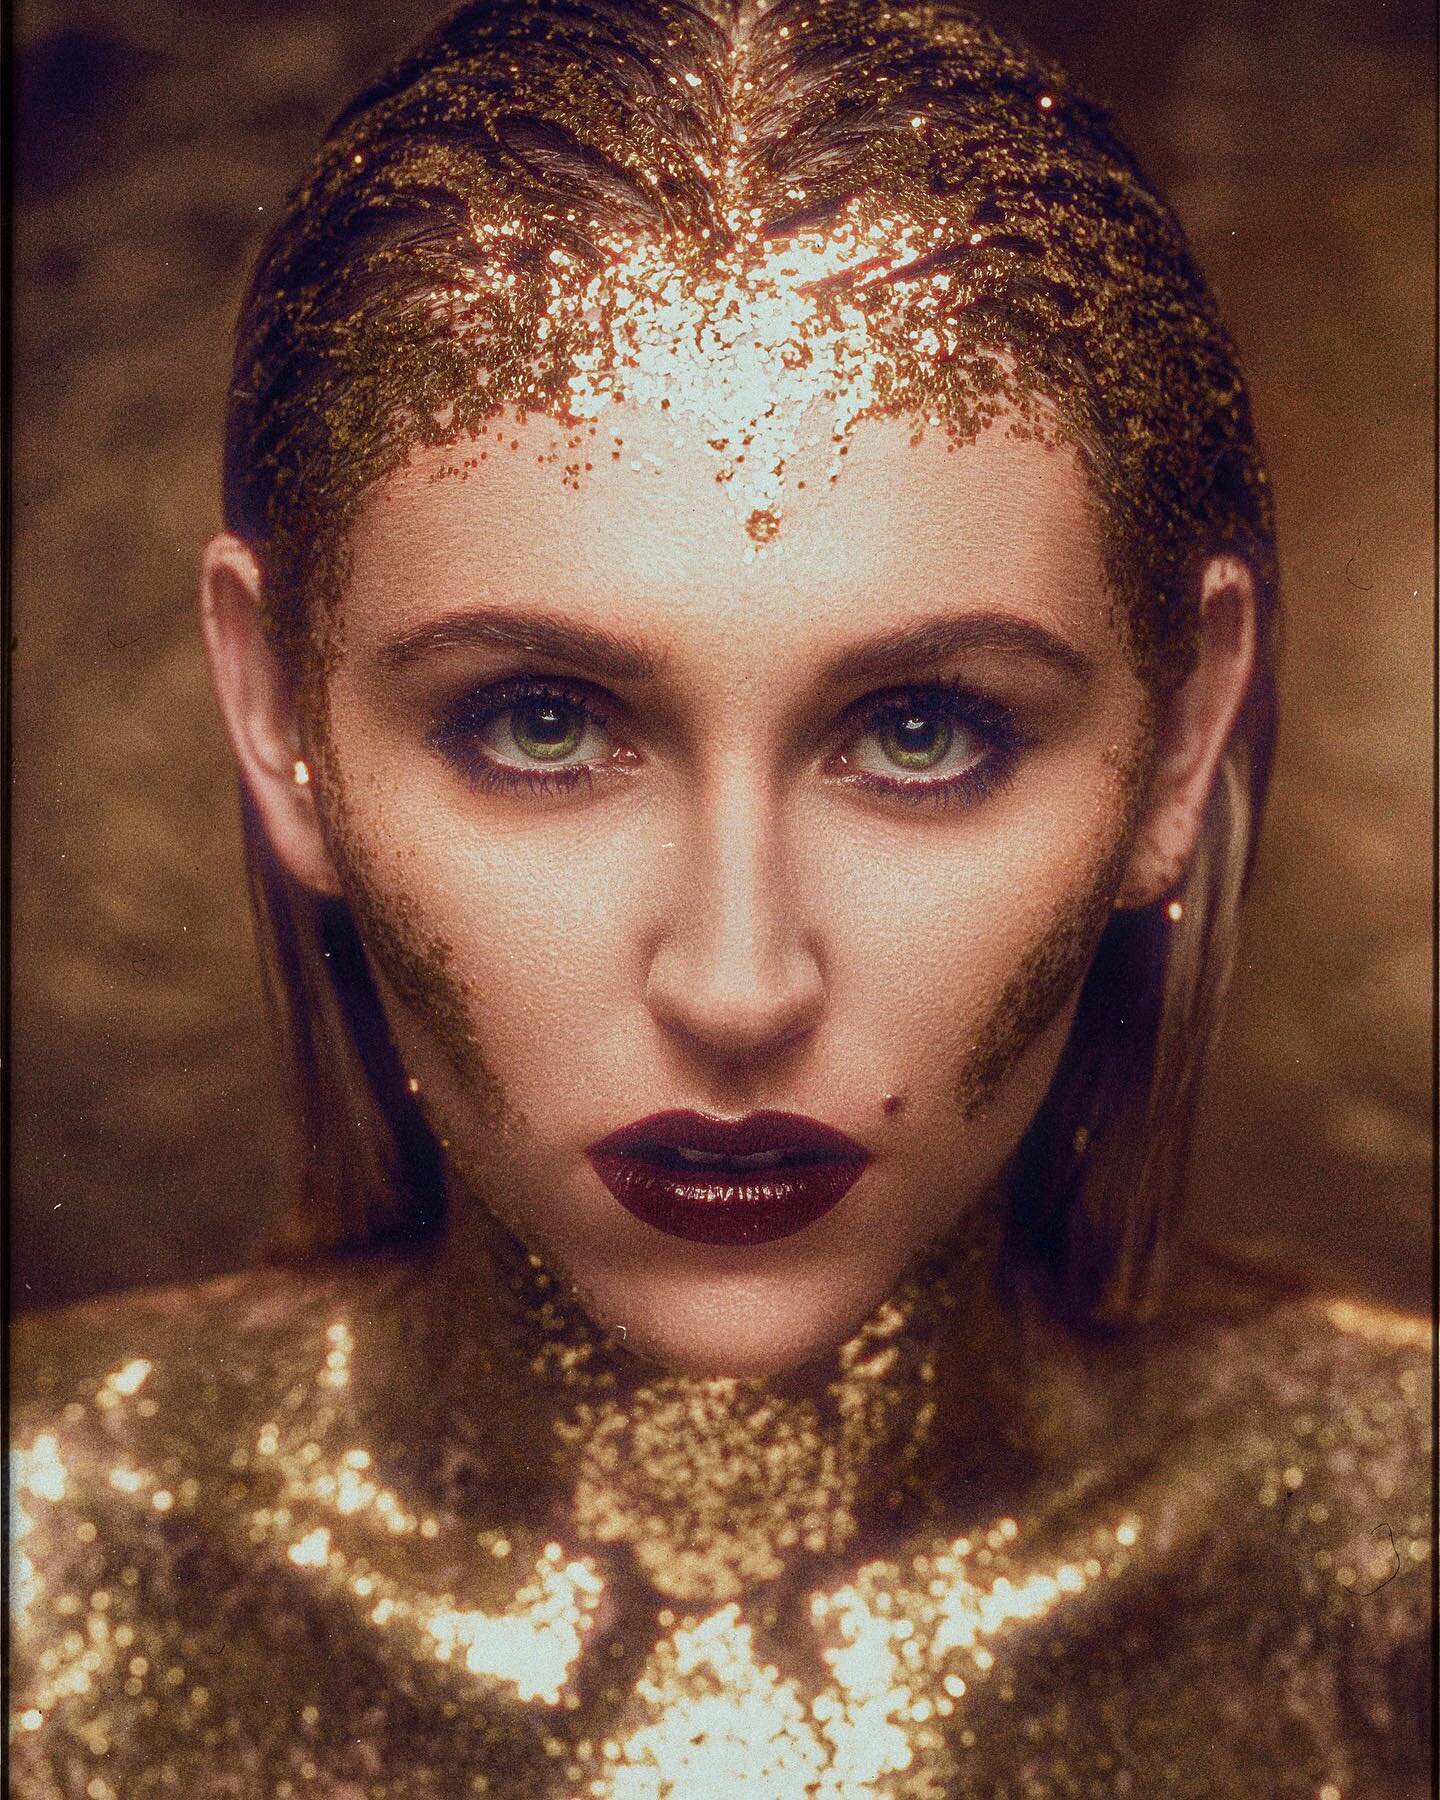 One of the funnest shoots to date, my model and I were covered in gold glitter and glue by the end of the shoot. Serving gilded glamour. What crazy craft shoot should I do next? , North Carolina, Fall 2017